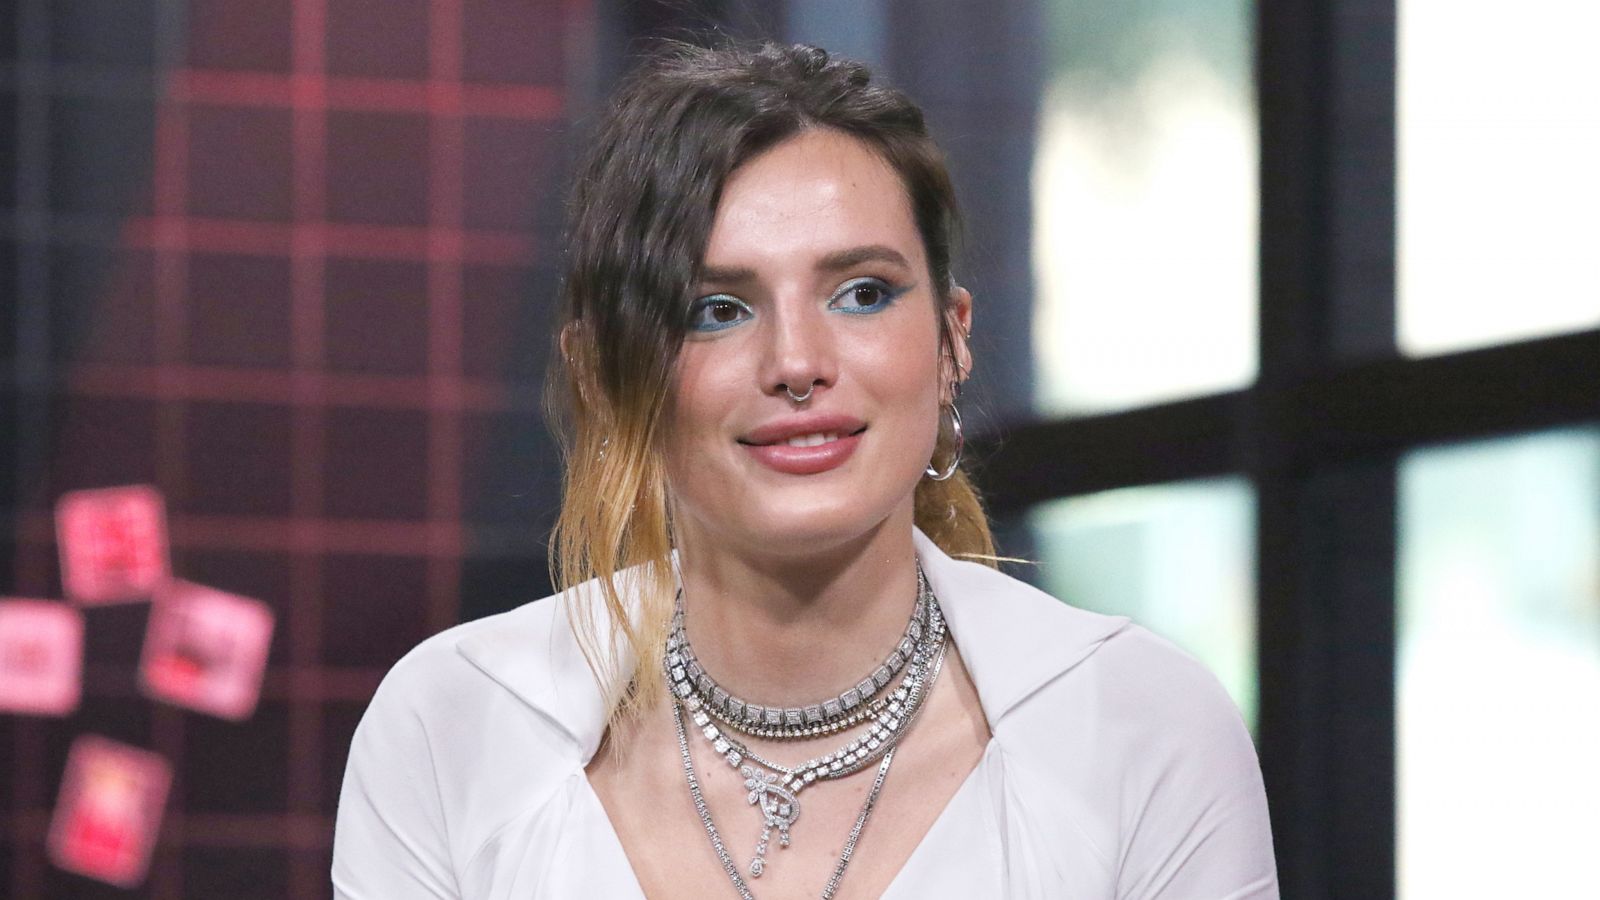 Bella Thorne's Jaw-Dropping 'Naked' Dress Is an Optical Illusion